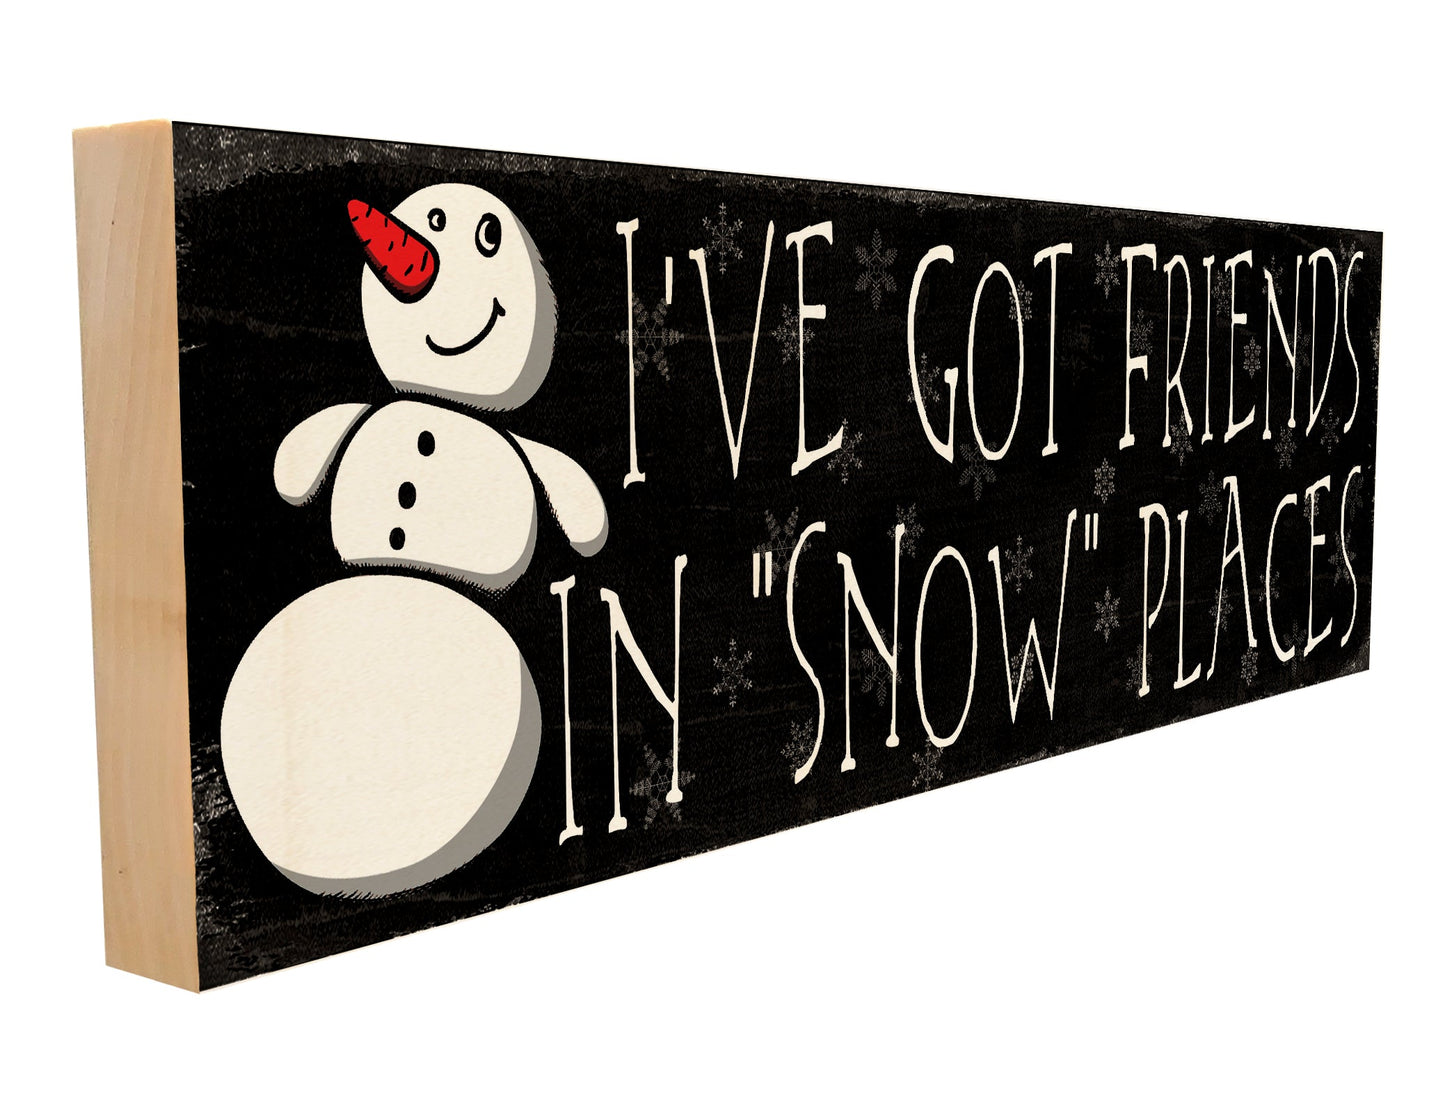 I've Got Friends in Snow Places.